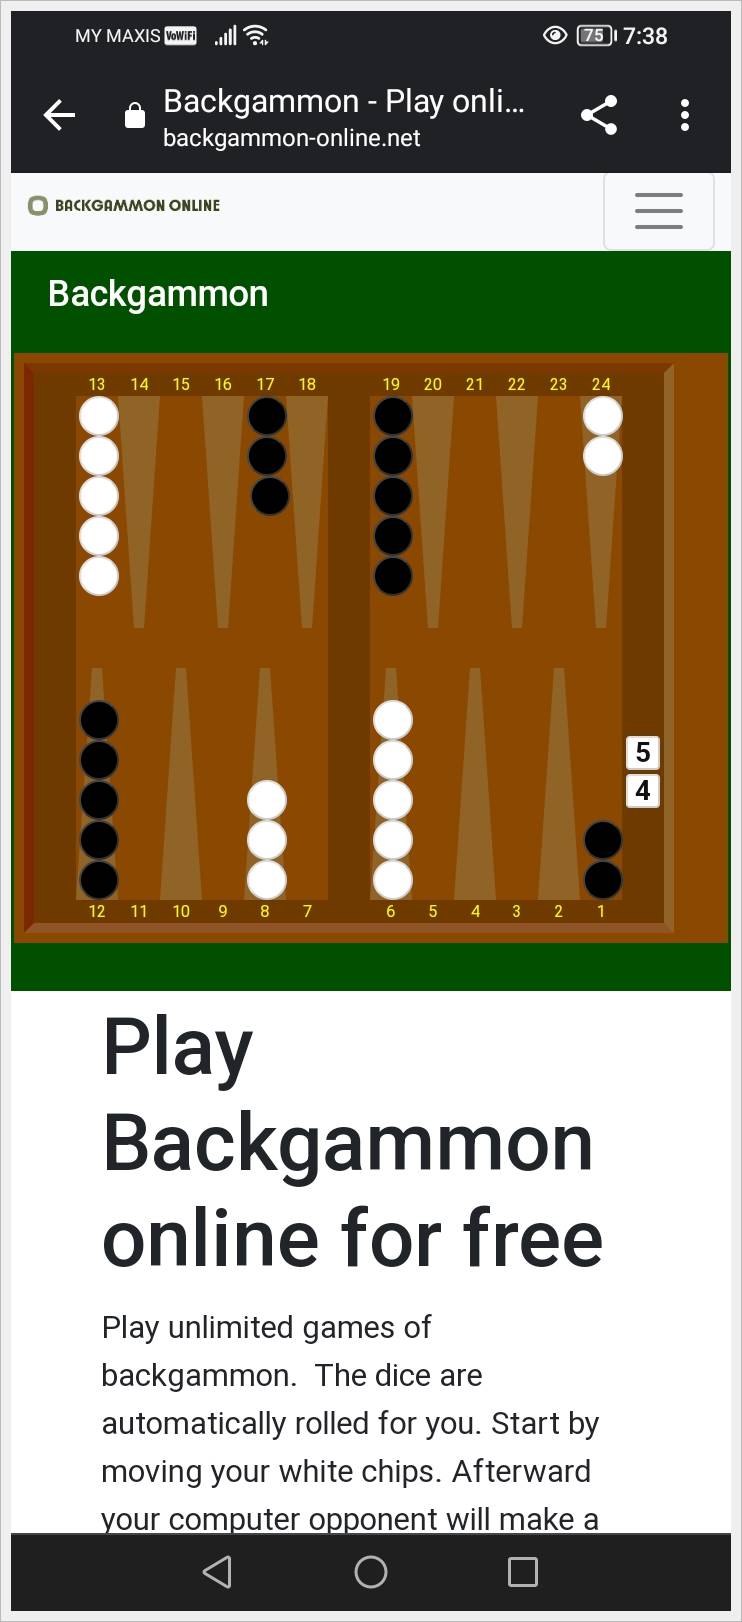 Google and Microsoft games alternatives: This is a mobile screenshot of the game Backgammon.